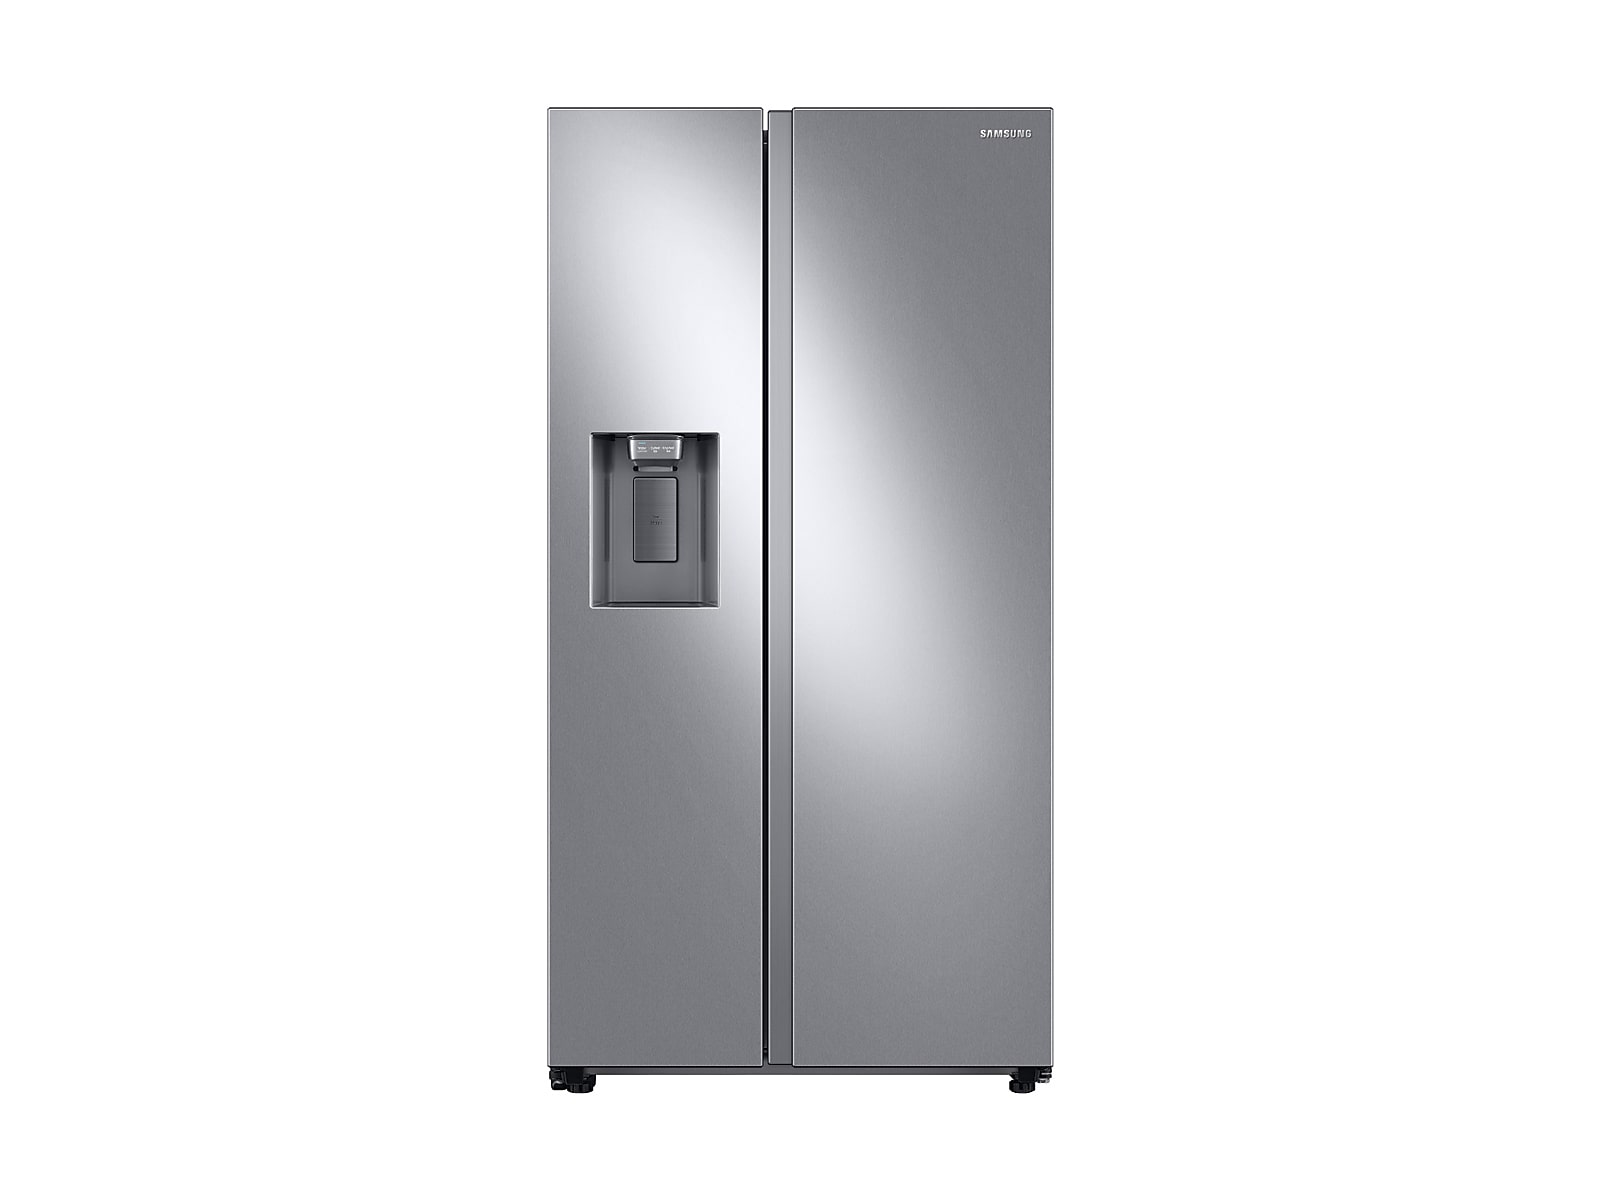 Samsung 27.4 cu. ft. Large Capacity Side-by-Side Refrigerator in Silver(RS27T5200SR/AA)